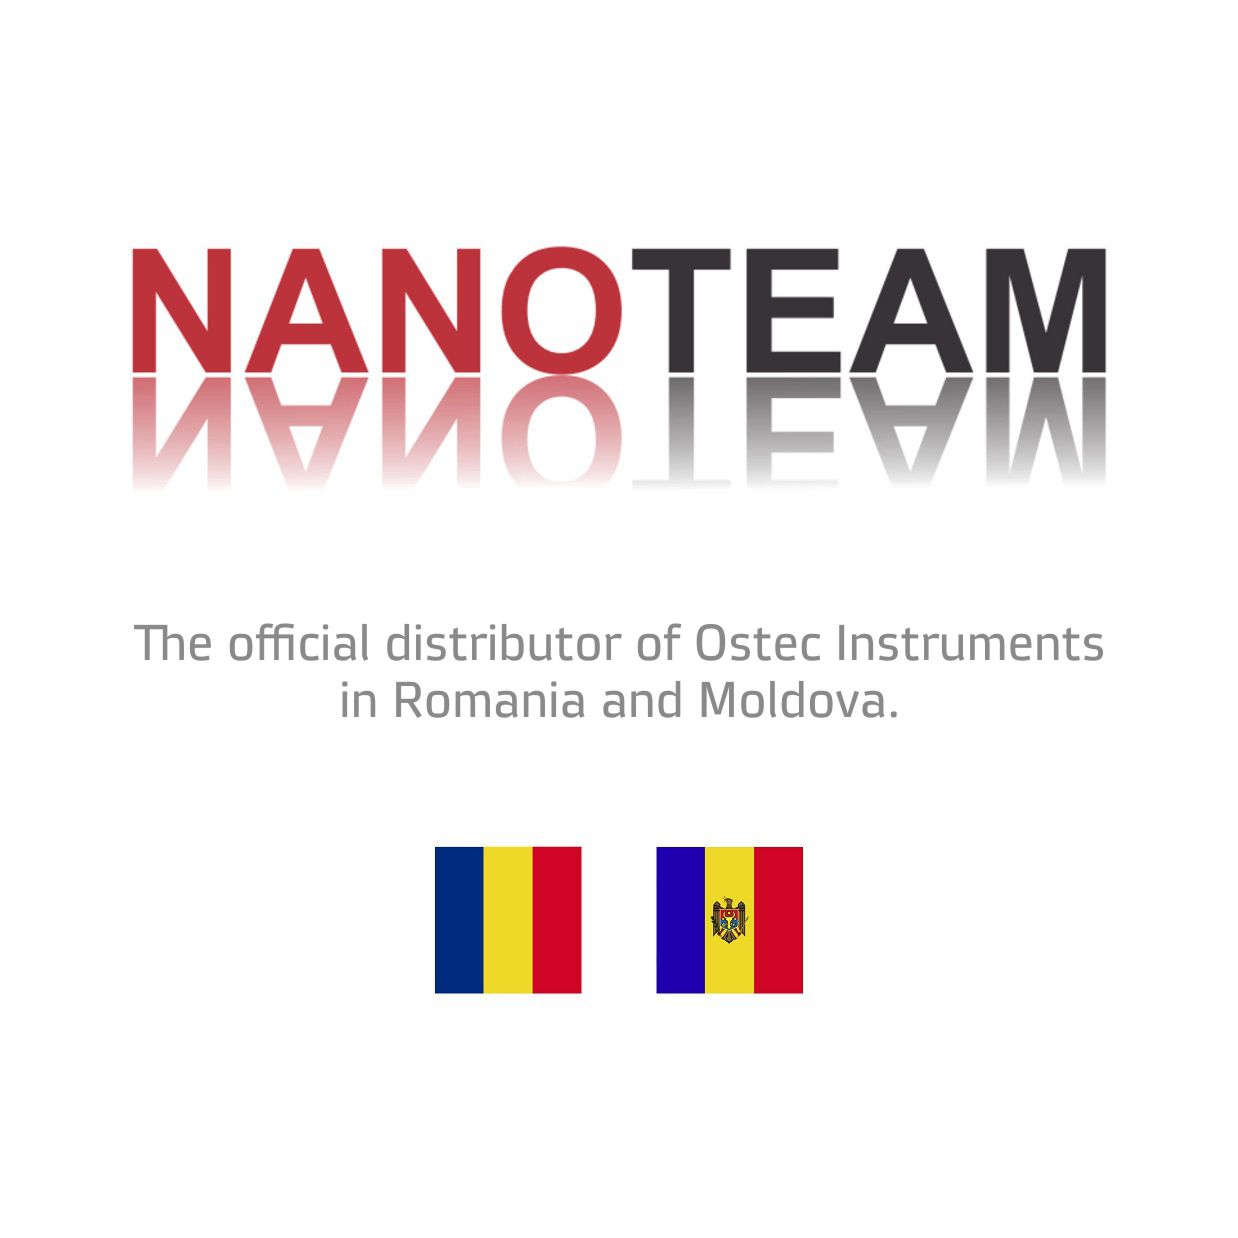 NanoTeam is the official distributor in Romania and Moldova